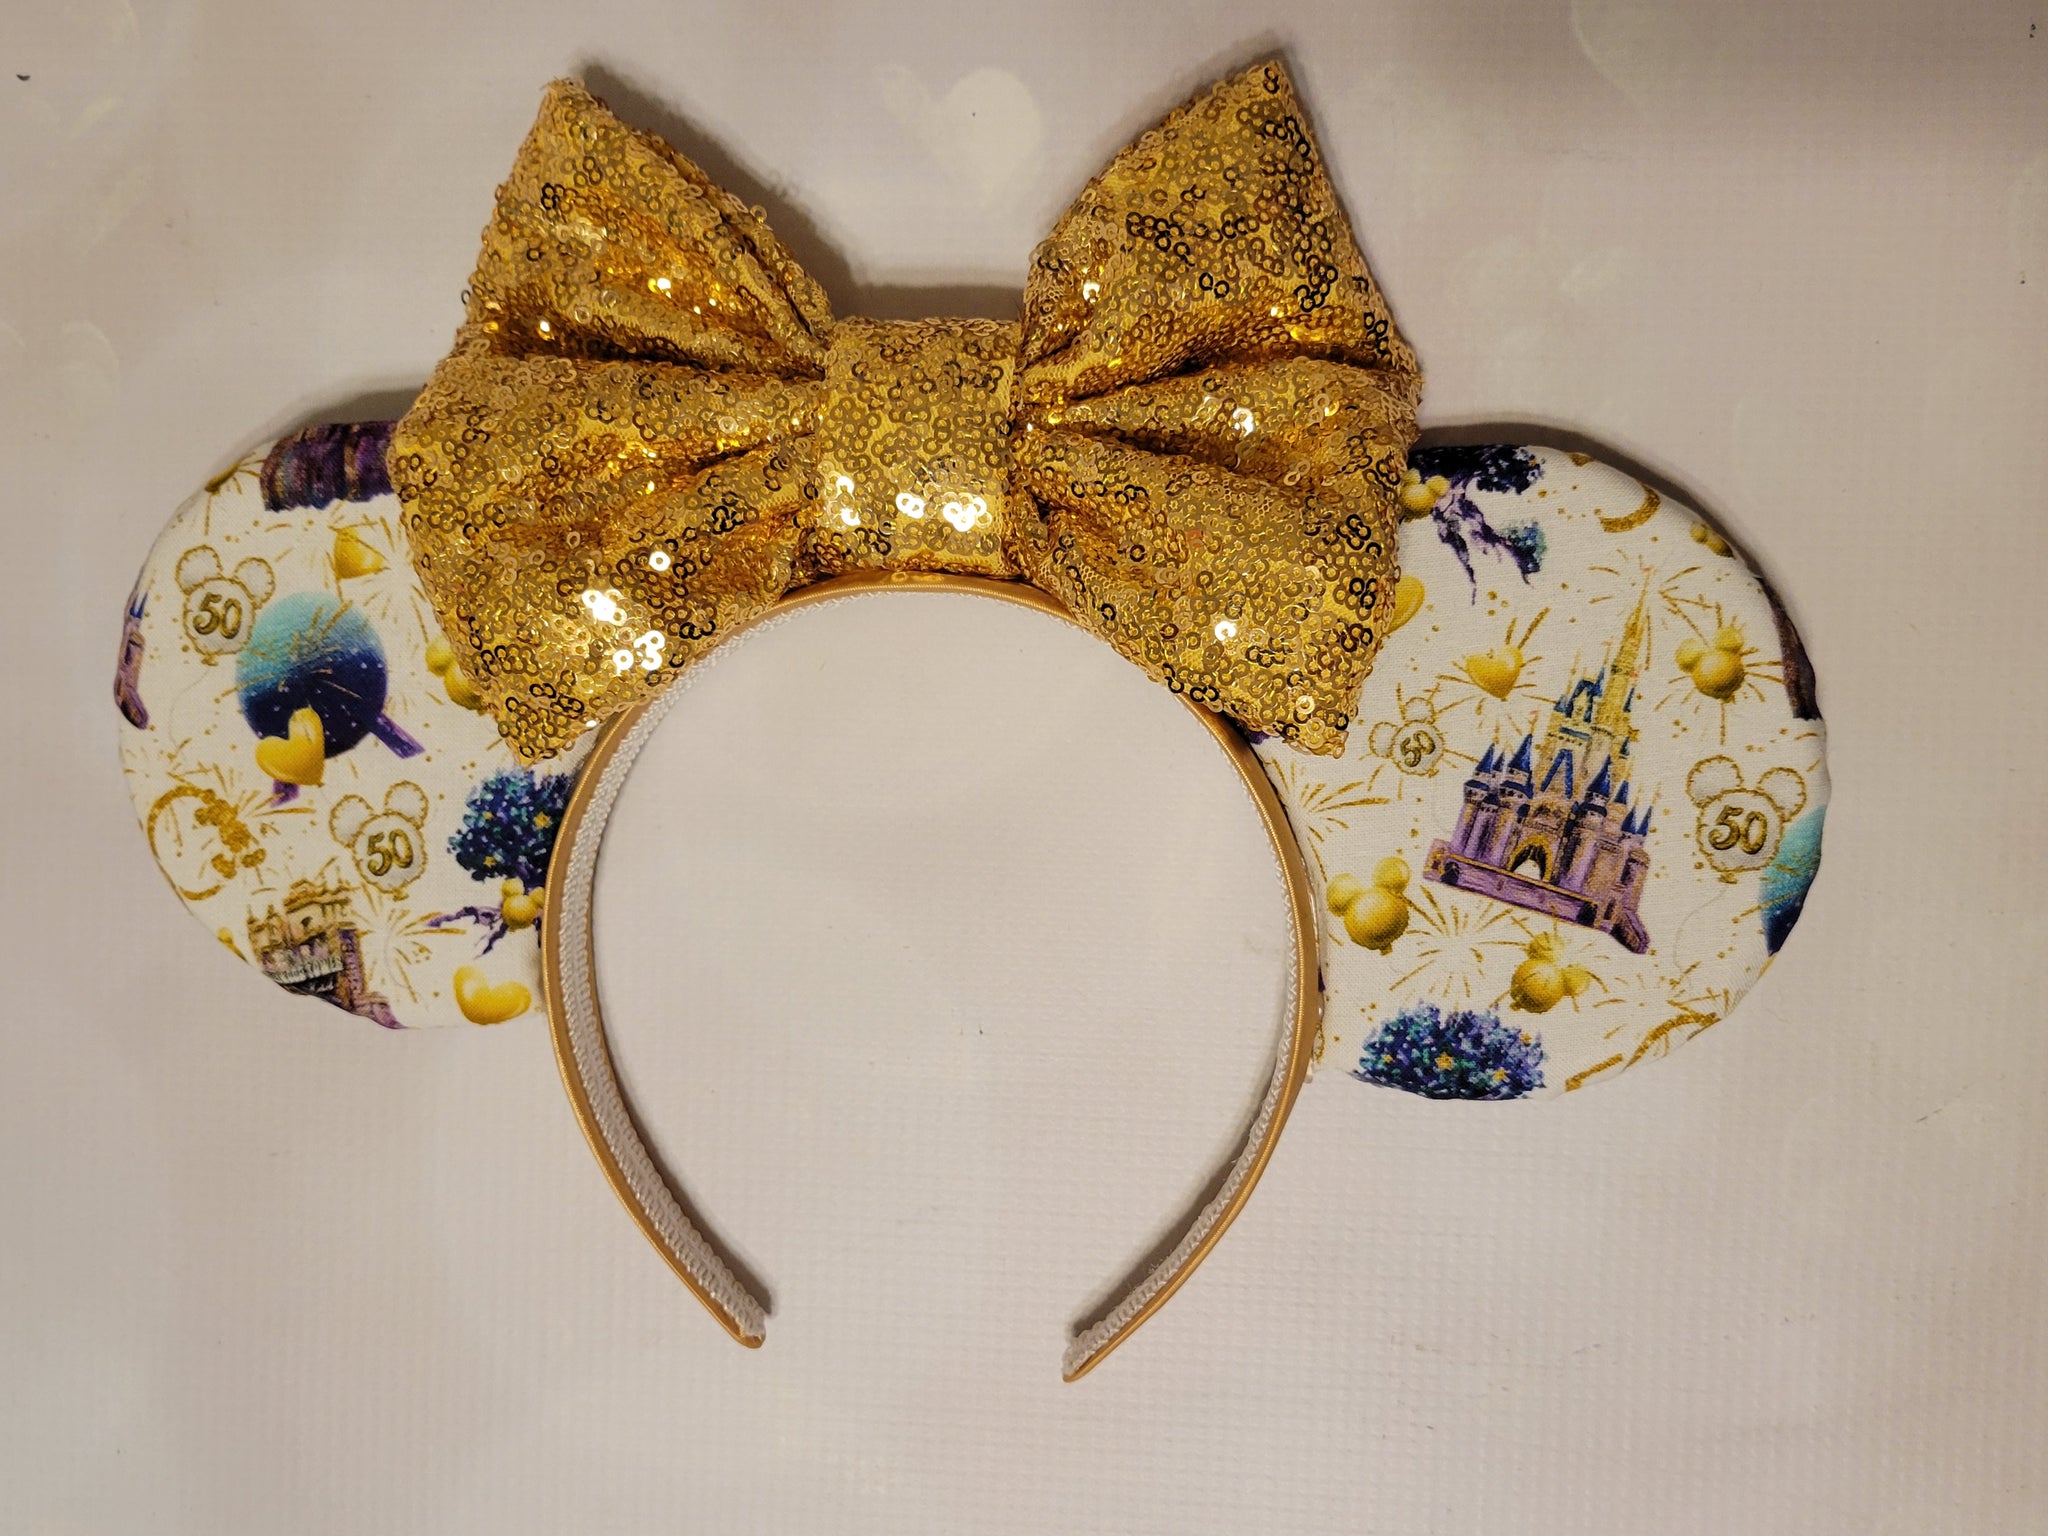 Disney Parks WDW 50th Anniversary Gold and Black Minnie Mouse Ears